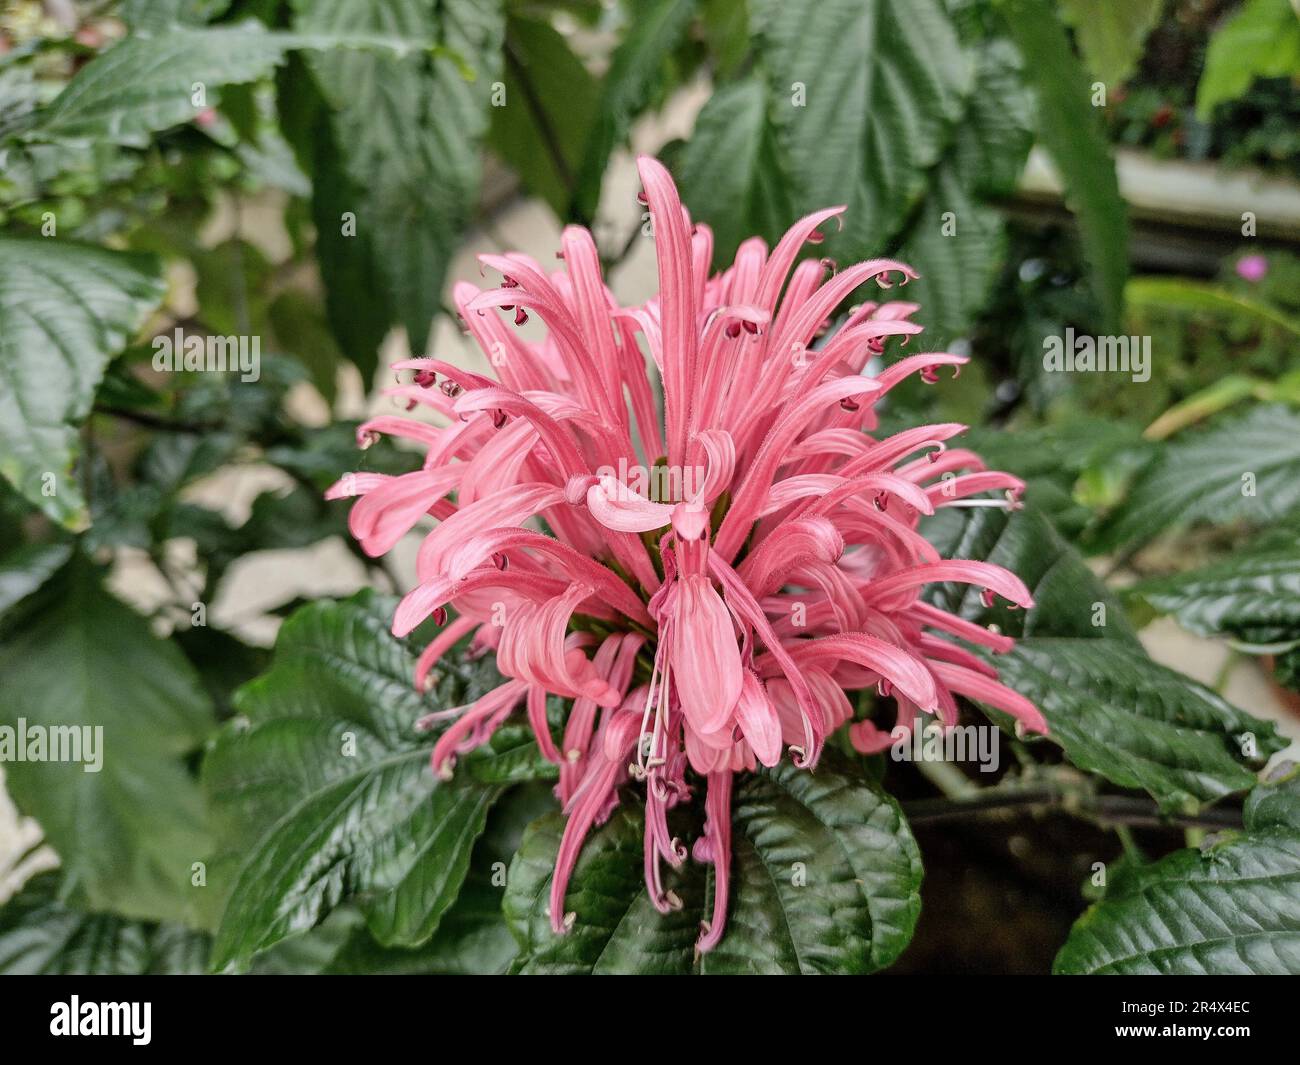 Justicia carnea flower at the botanical garden Stock Photo